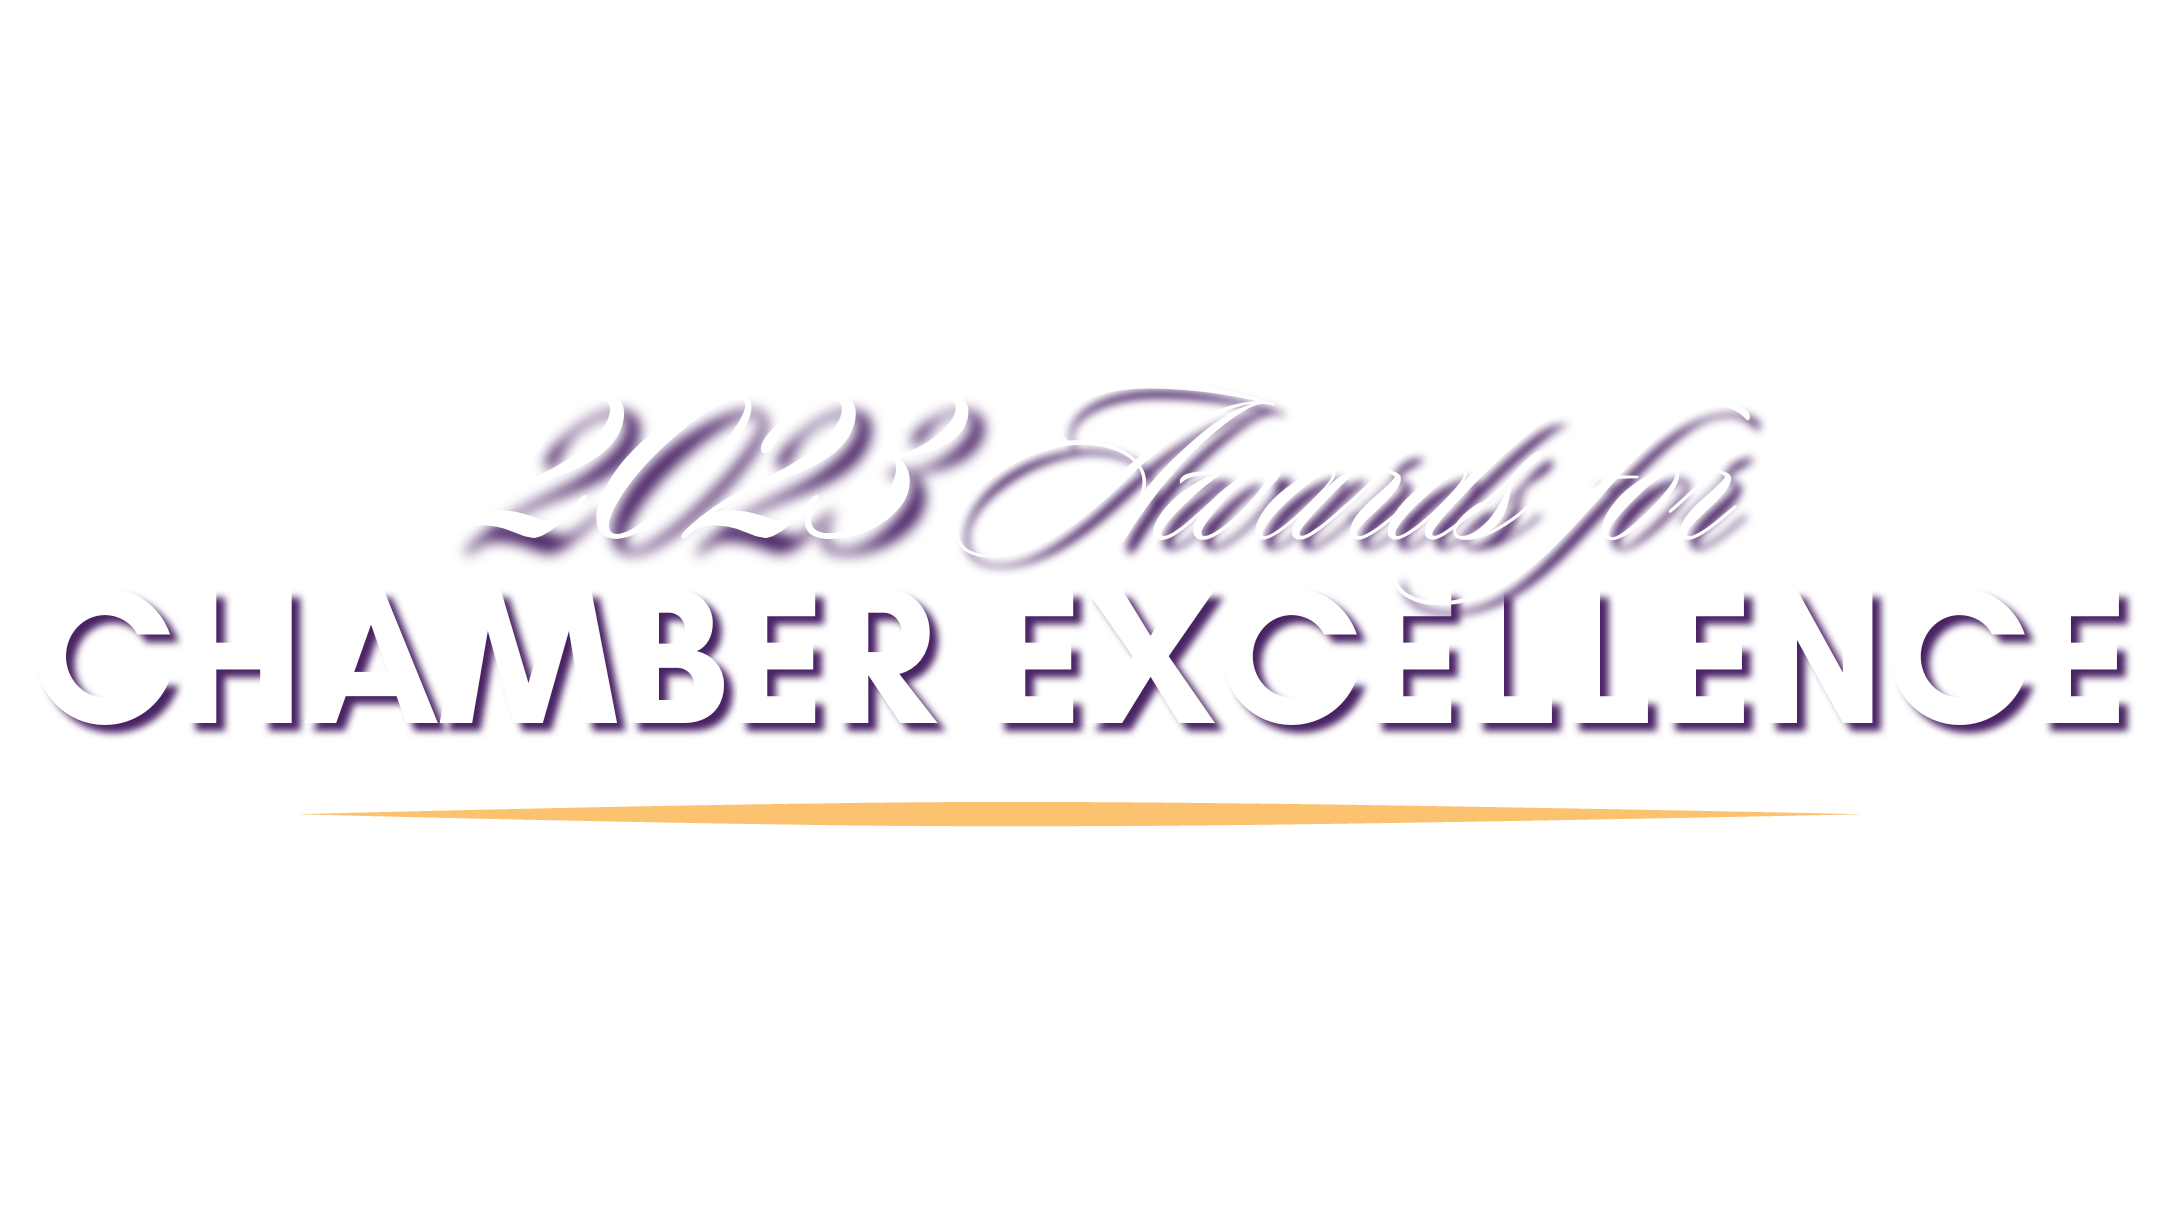 2023 Awards for Chamber Excellence Greater Reston Chamber of Commerce